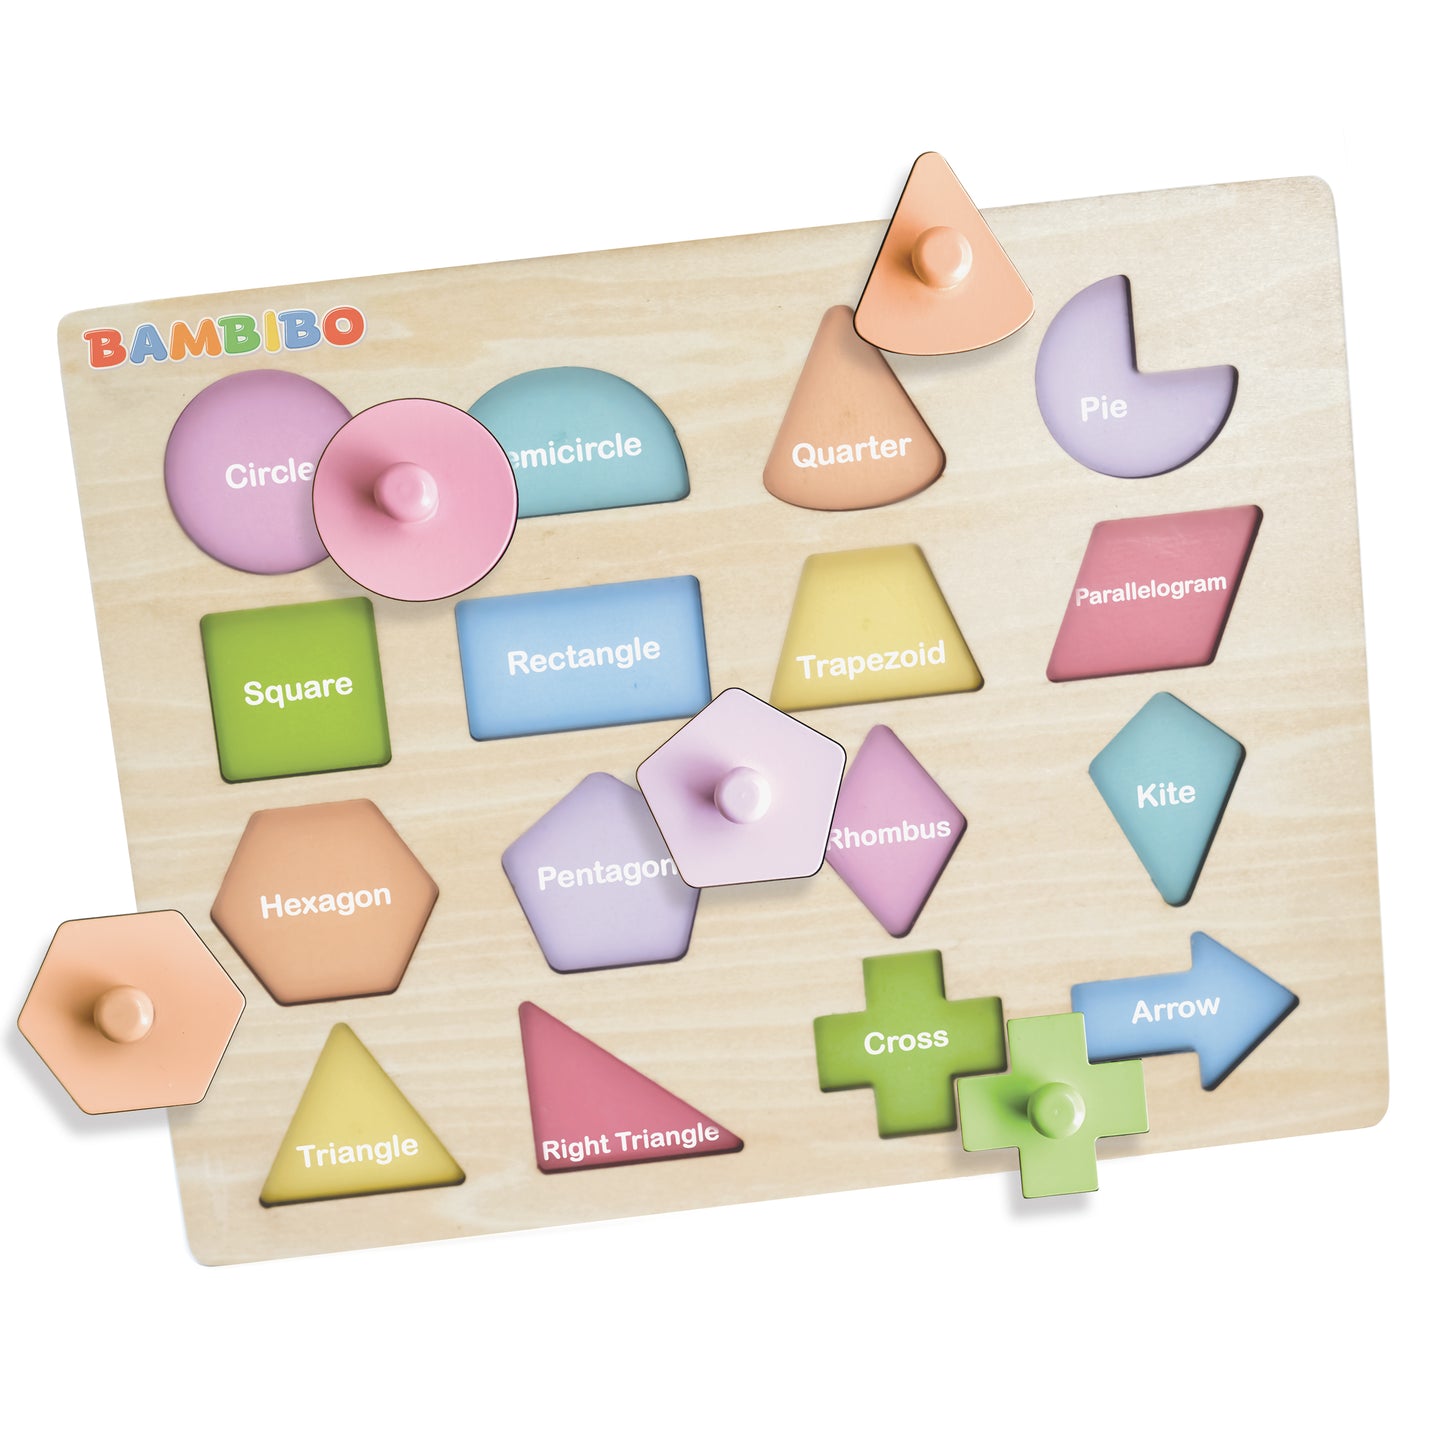 Bambibo Wooden Shape Puzzles for Kids Ages 3-5 | Toddler Puzzles with 16 Shapes and Knobs | 8 Pastel Color Puzzles for Toddlers 1-3 | Toddler Shapes Learning Toys | Shapes Puzzles for Toddlers 3-5